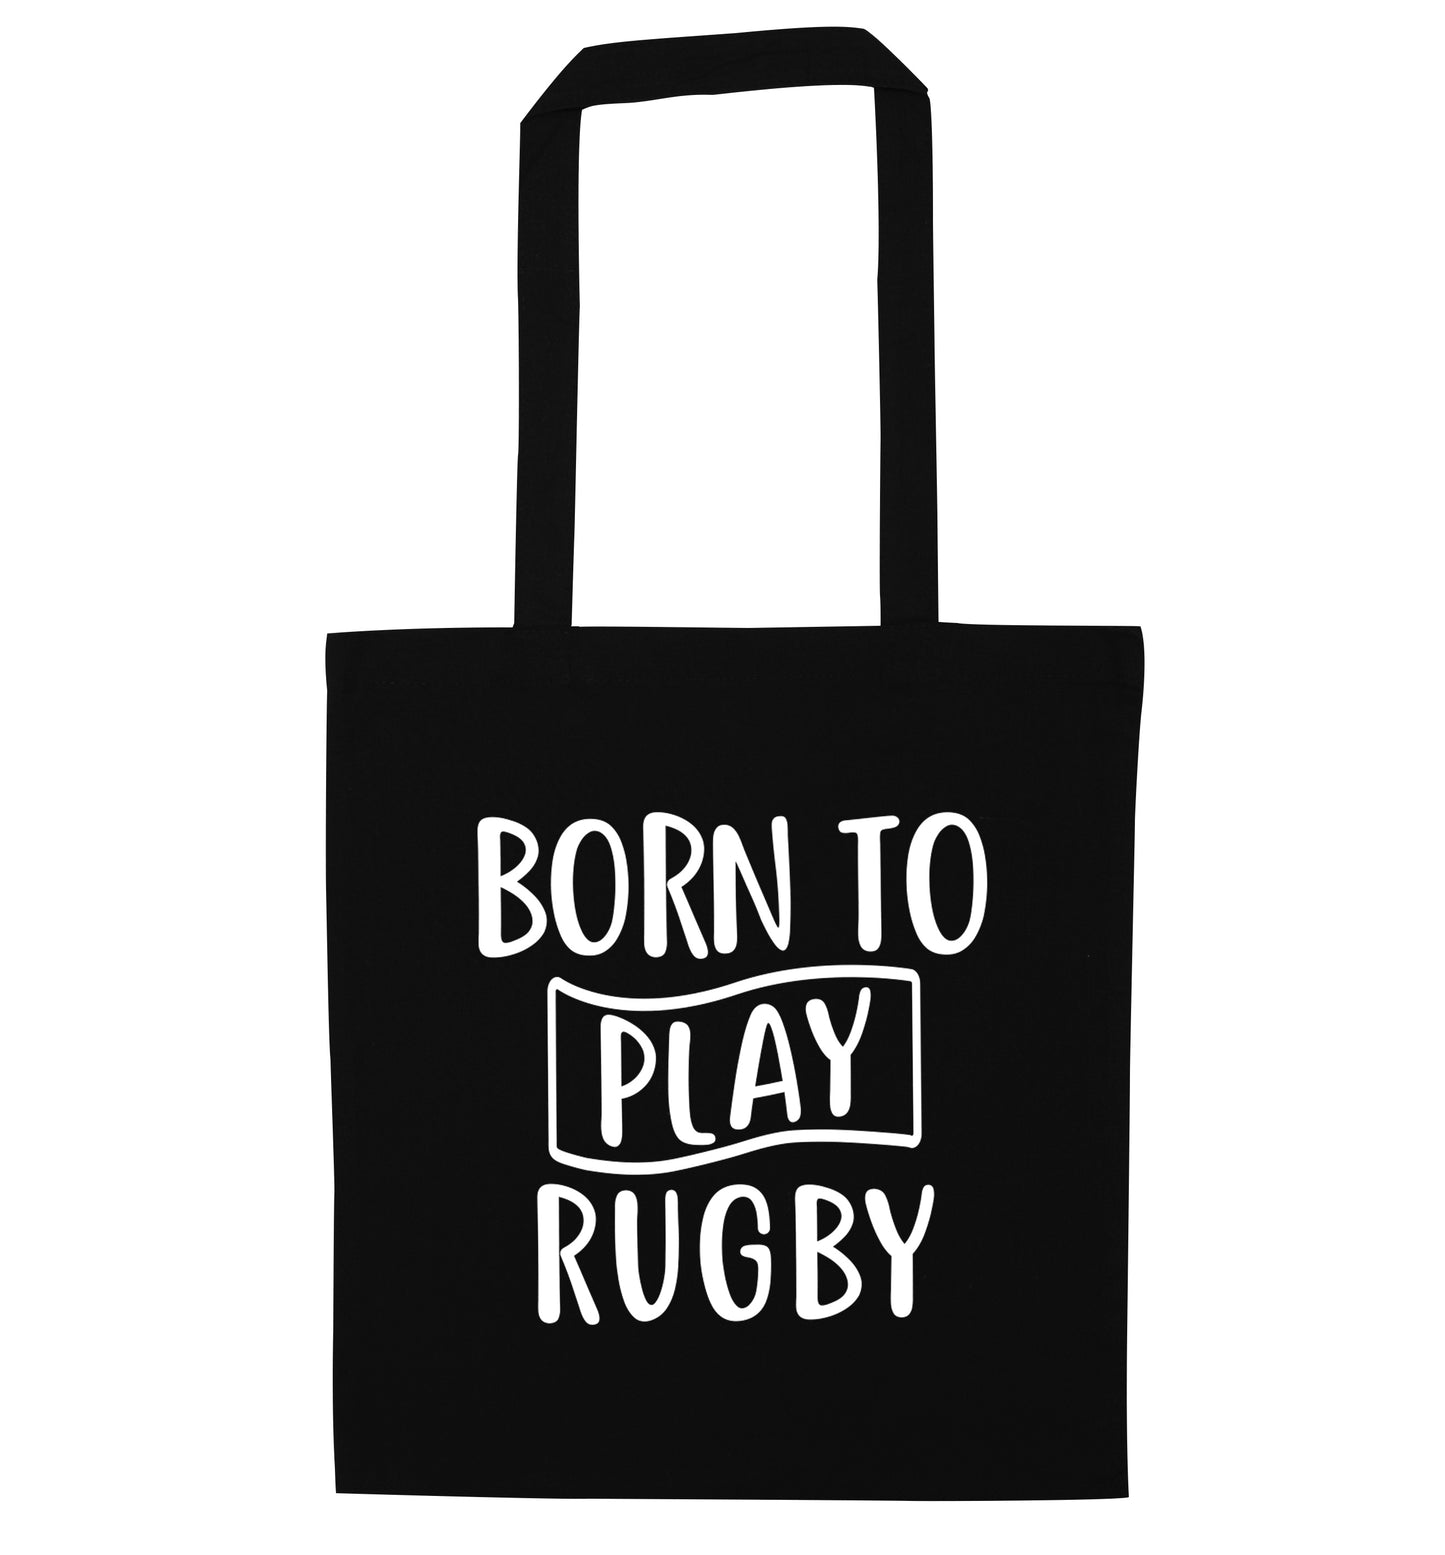 Born to play rugby black tote bag